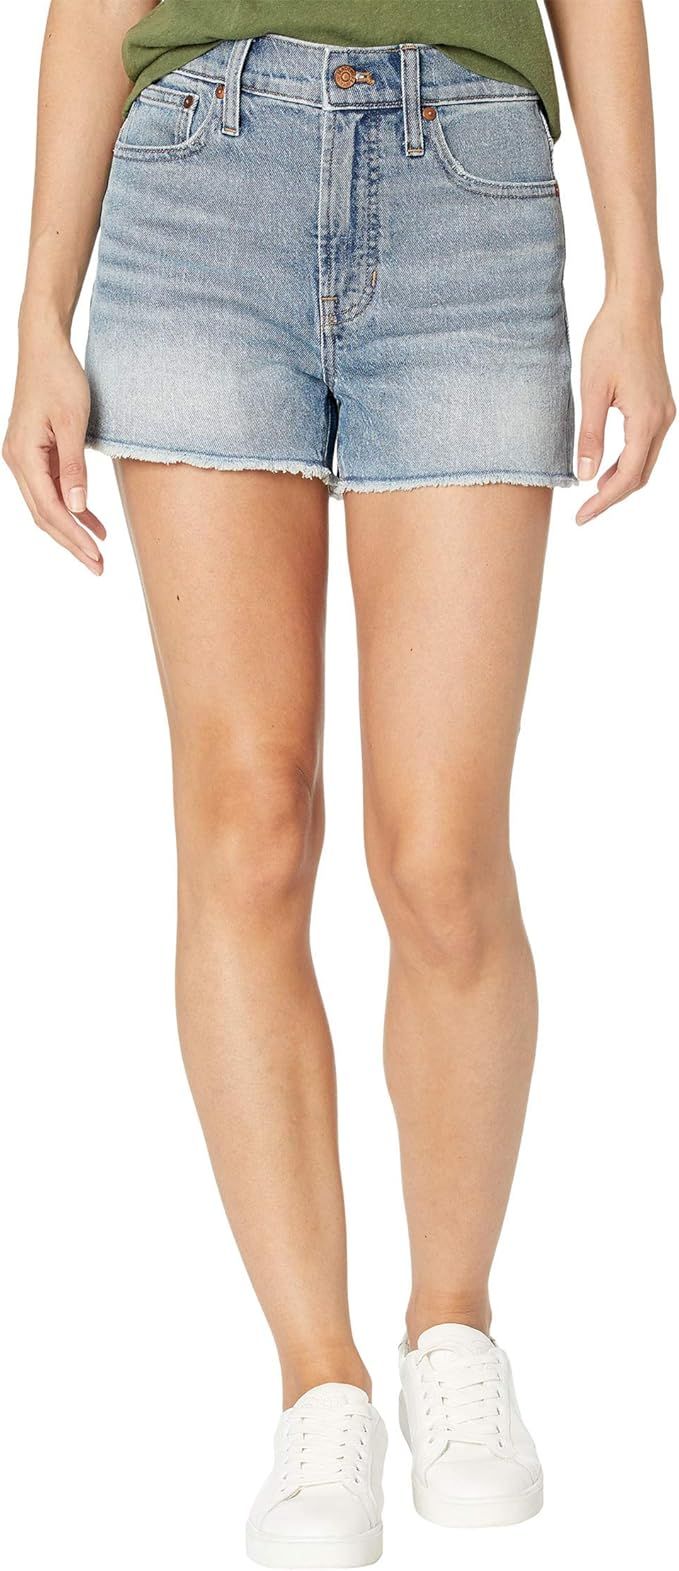 Madewell The Perfect Vintage Jean Shorts in Bartow Wash | Amazon (US)